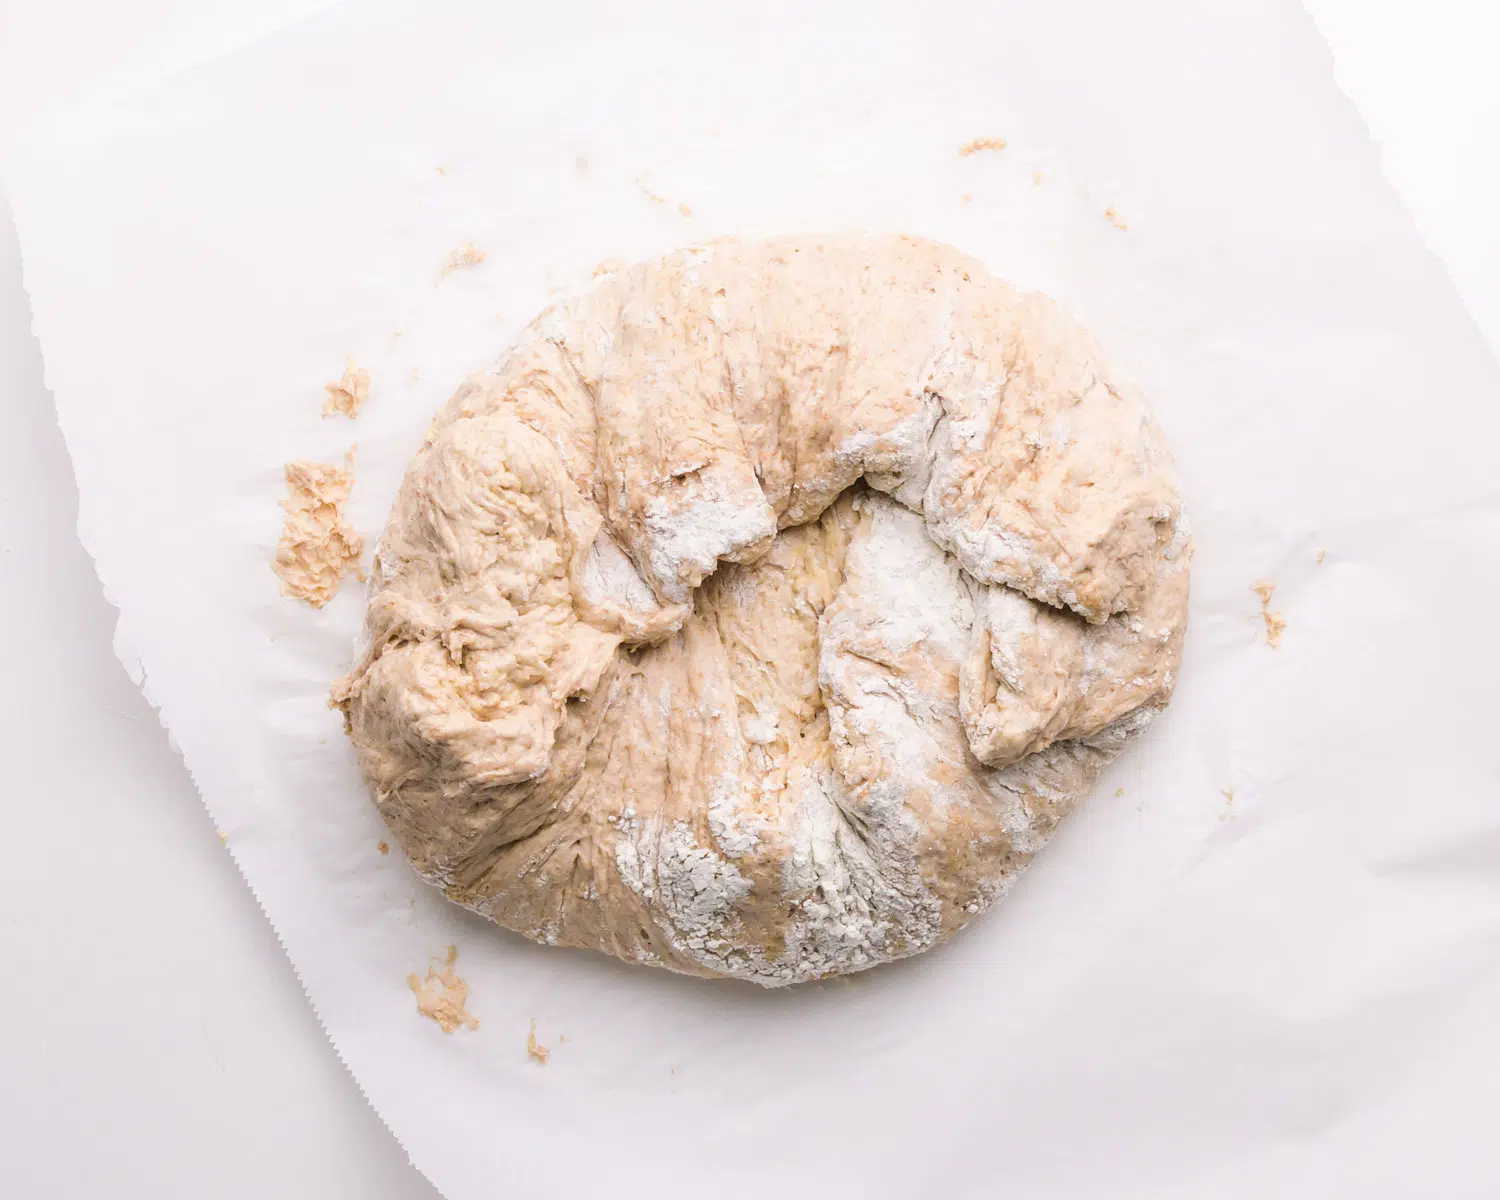 A ball of dough sits on a sheet of parchment paper.